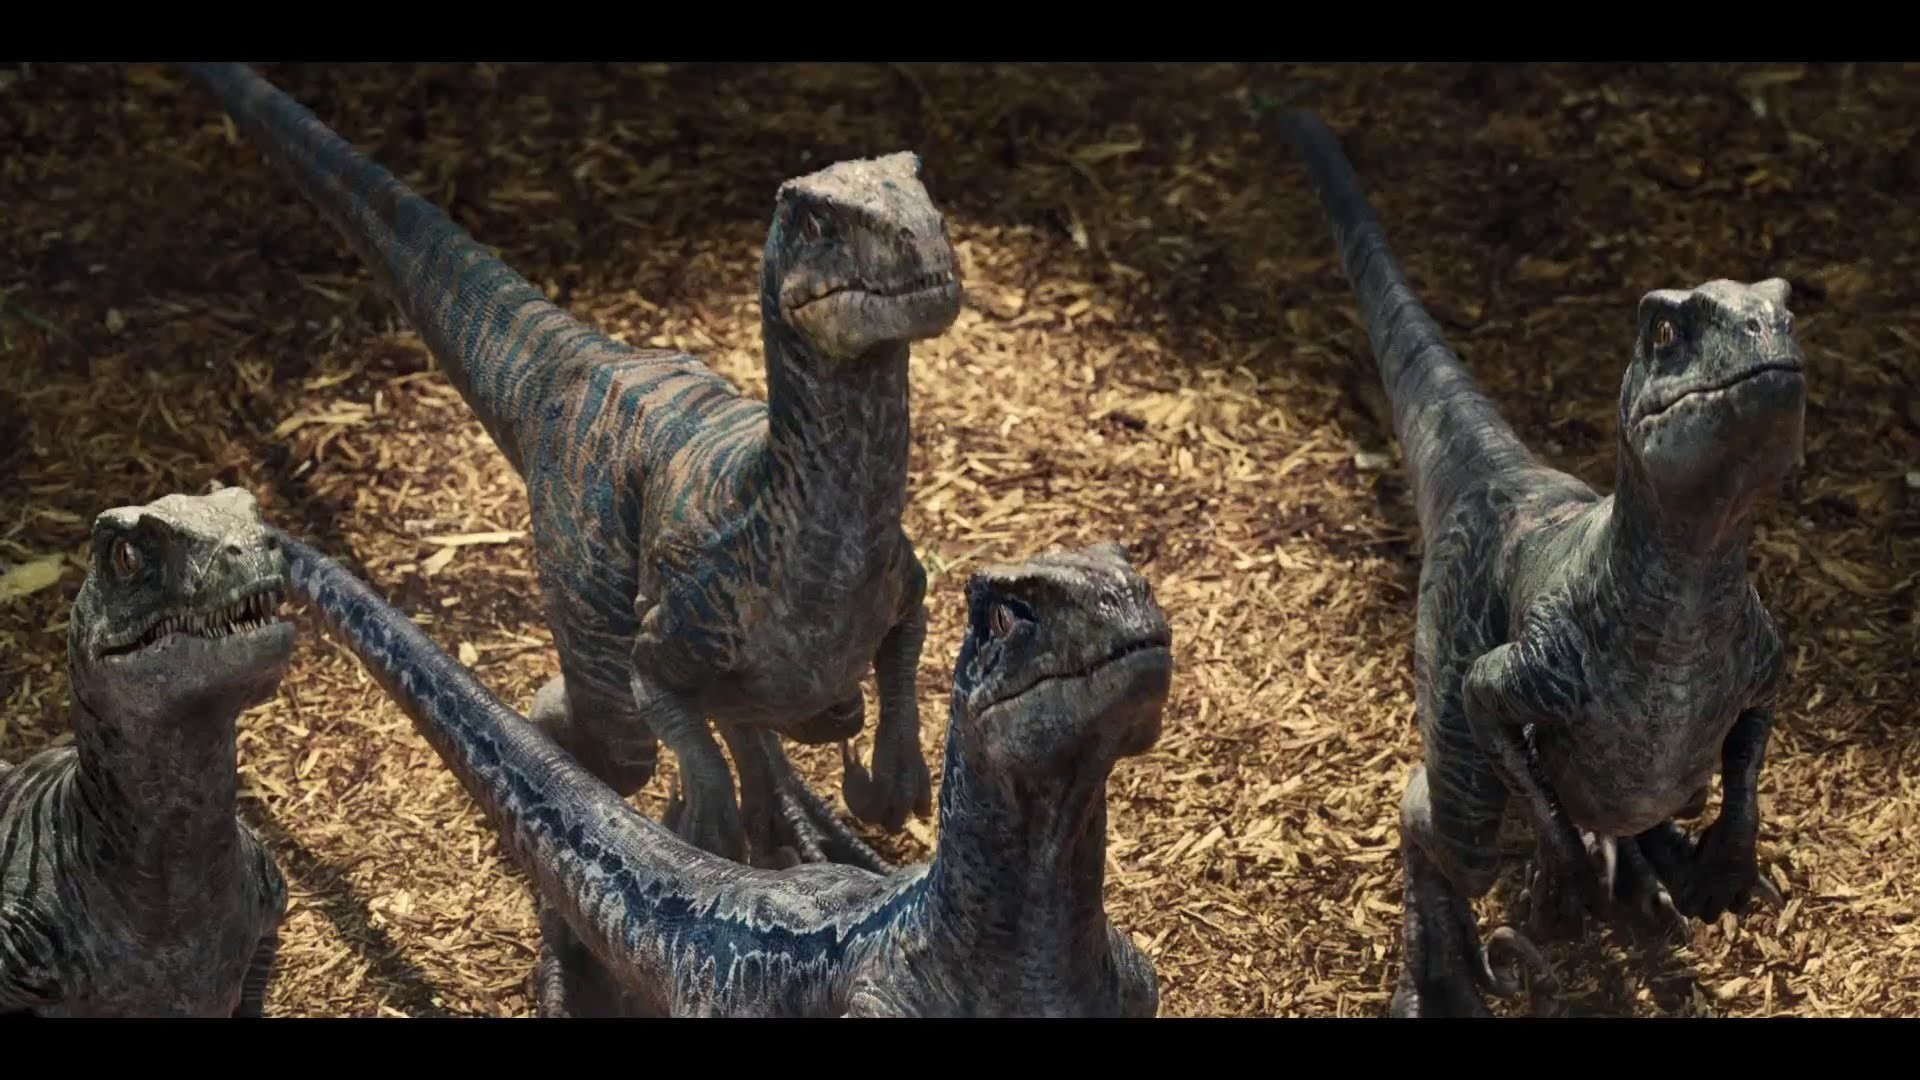 Jurassic World Sequel Movie News Trailers Cast And Plot Page 5 1920x1080